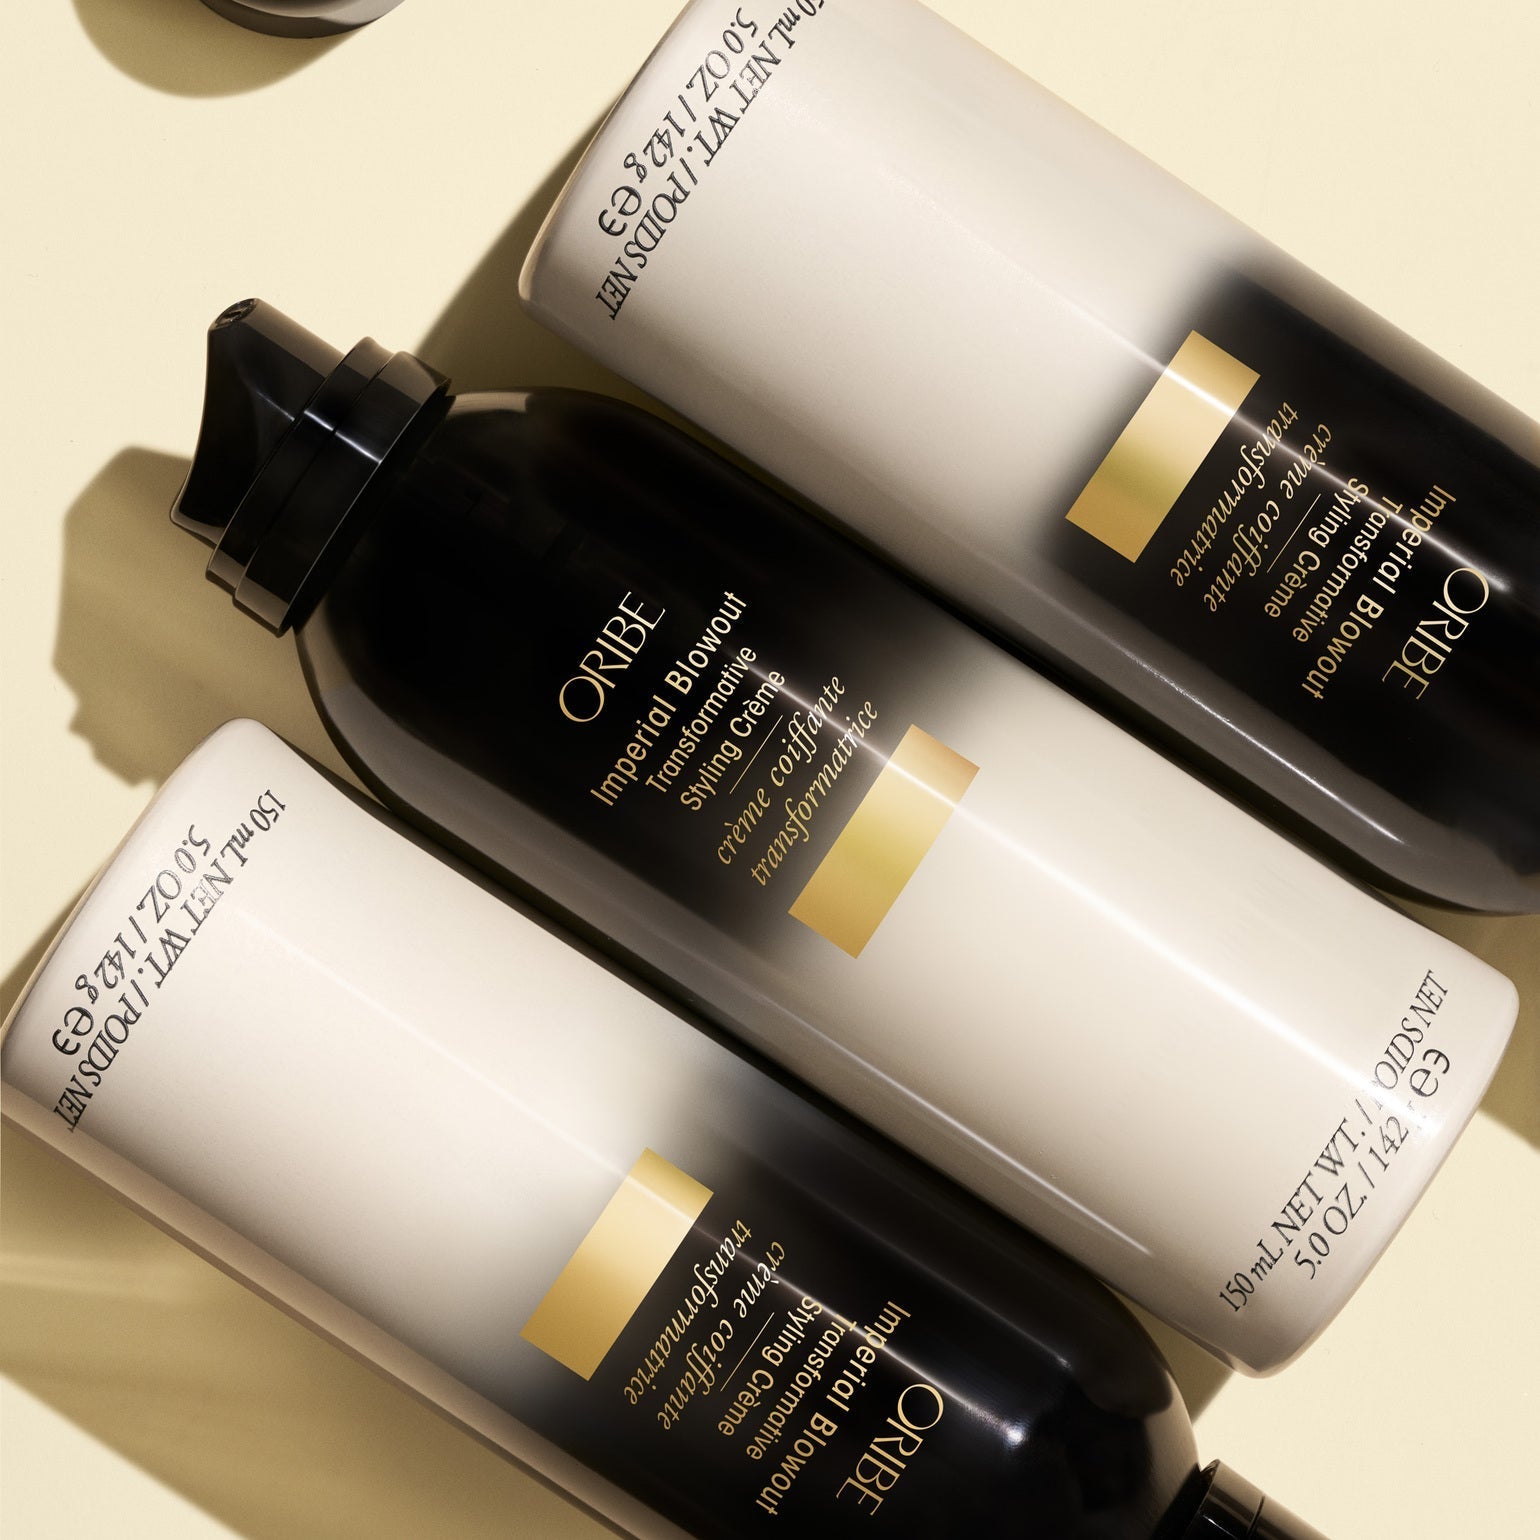 Imperial Blowout Transformative Styling Crème - Oribe Hair Care